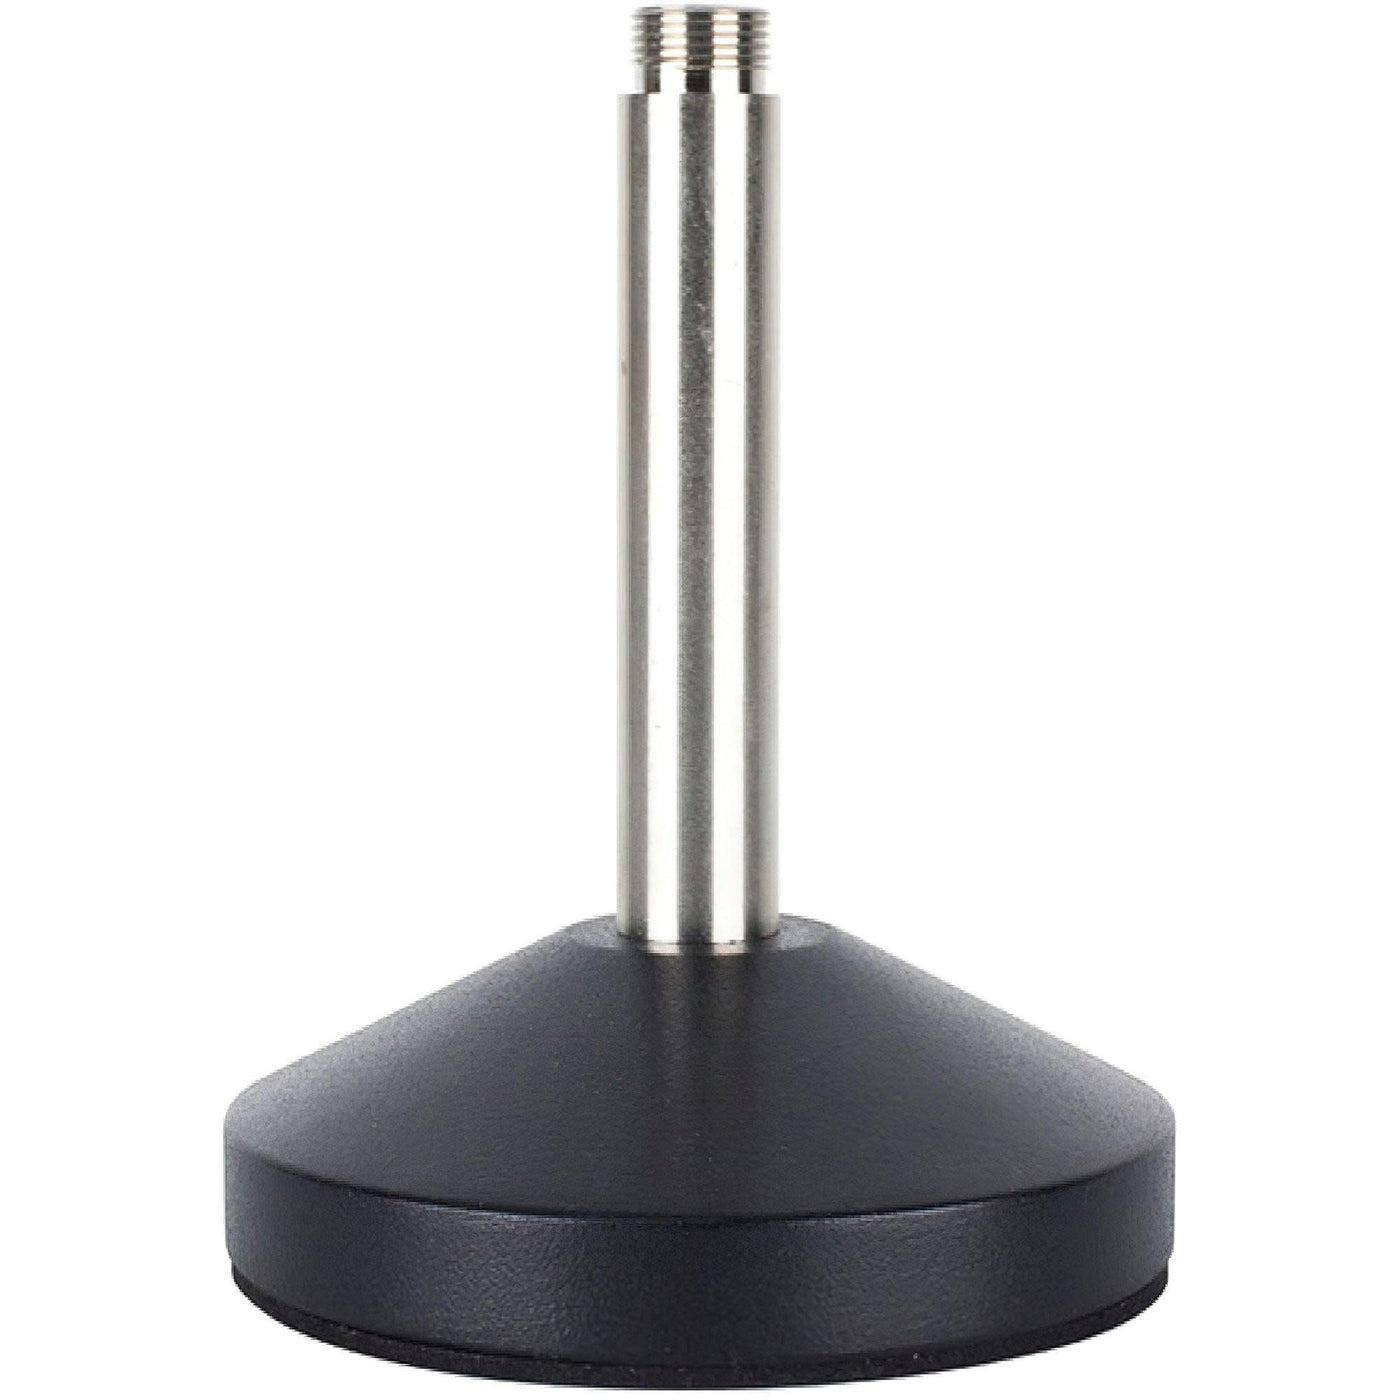 MXL DS-03 Tabletop Microphone Stand